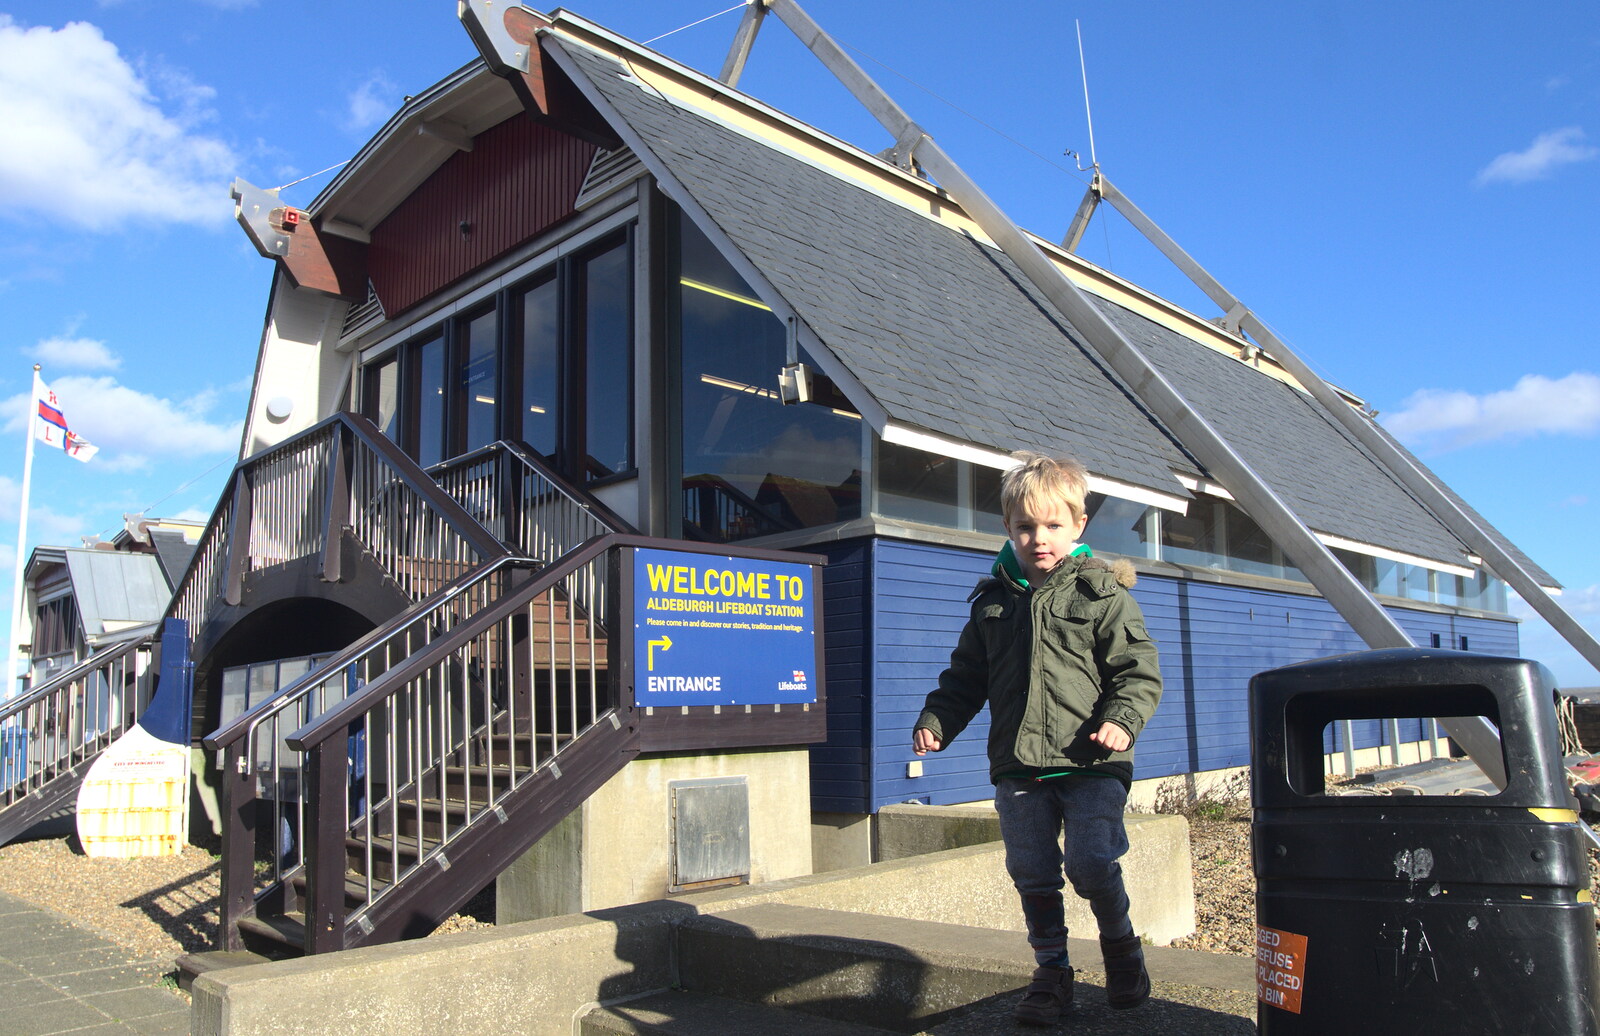 A Trip to Aldeburgh, Suffolk - 7th February 2016: Harry outside the lifeboat shed